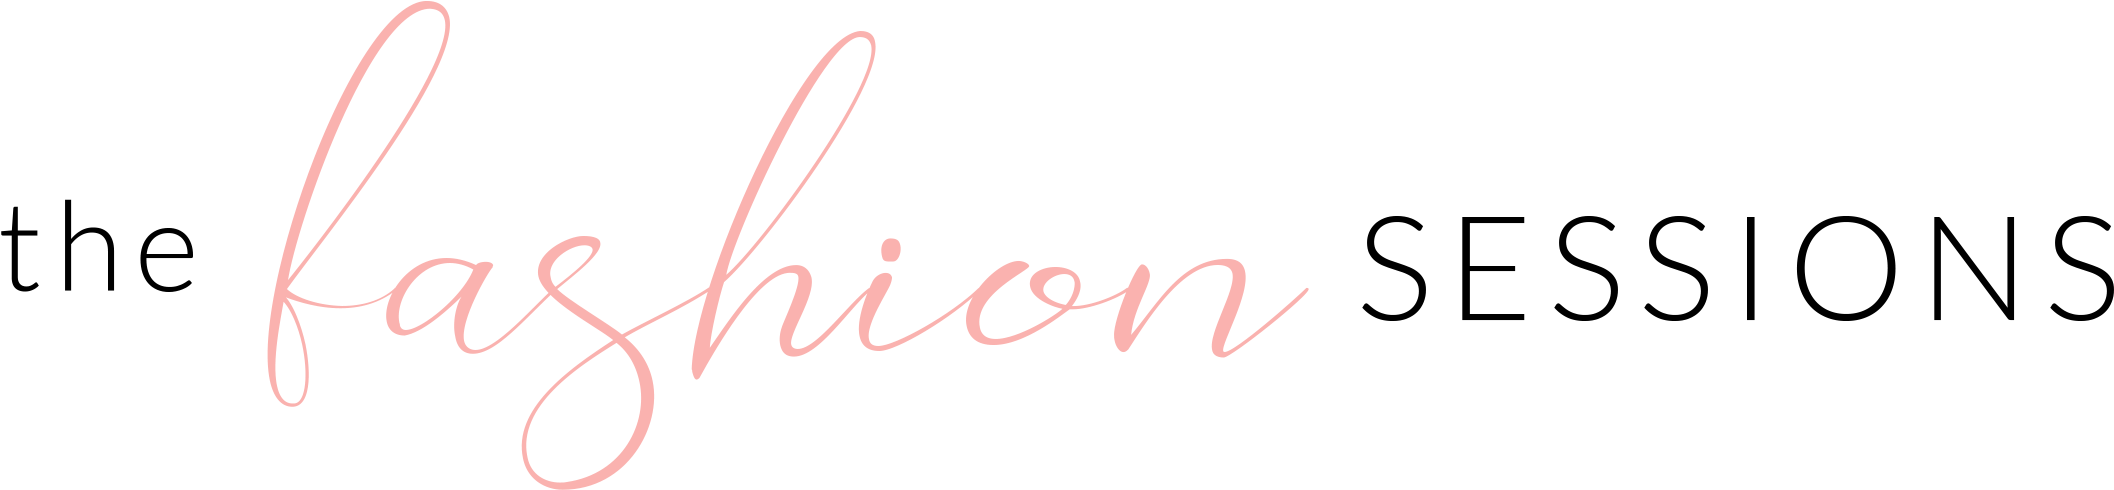 Fashion Sessions Logo PNG image